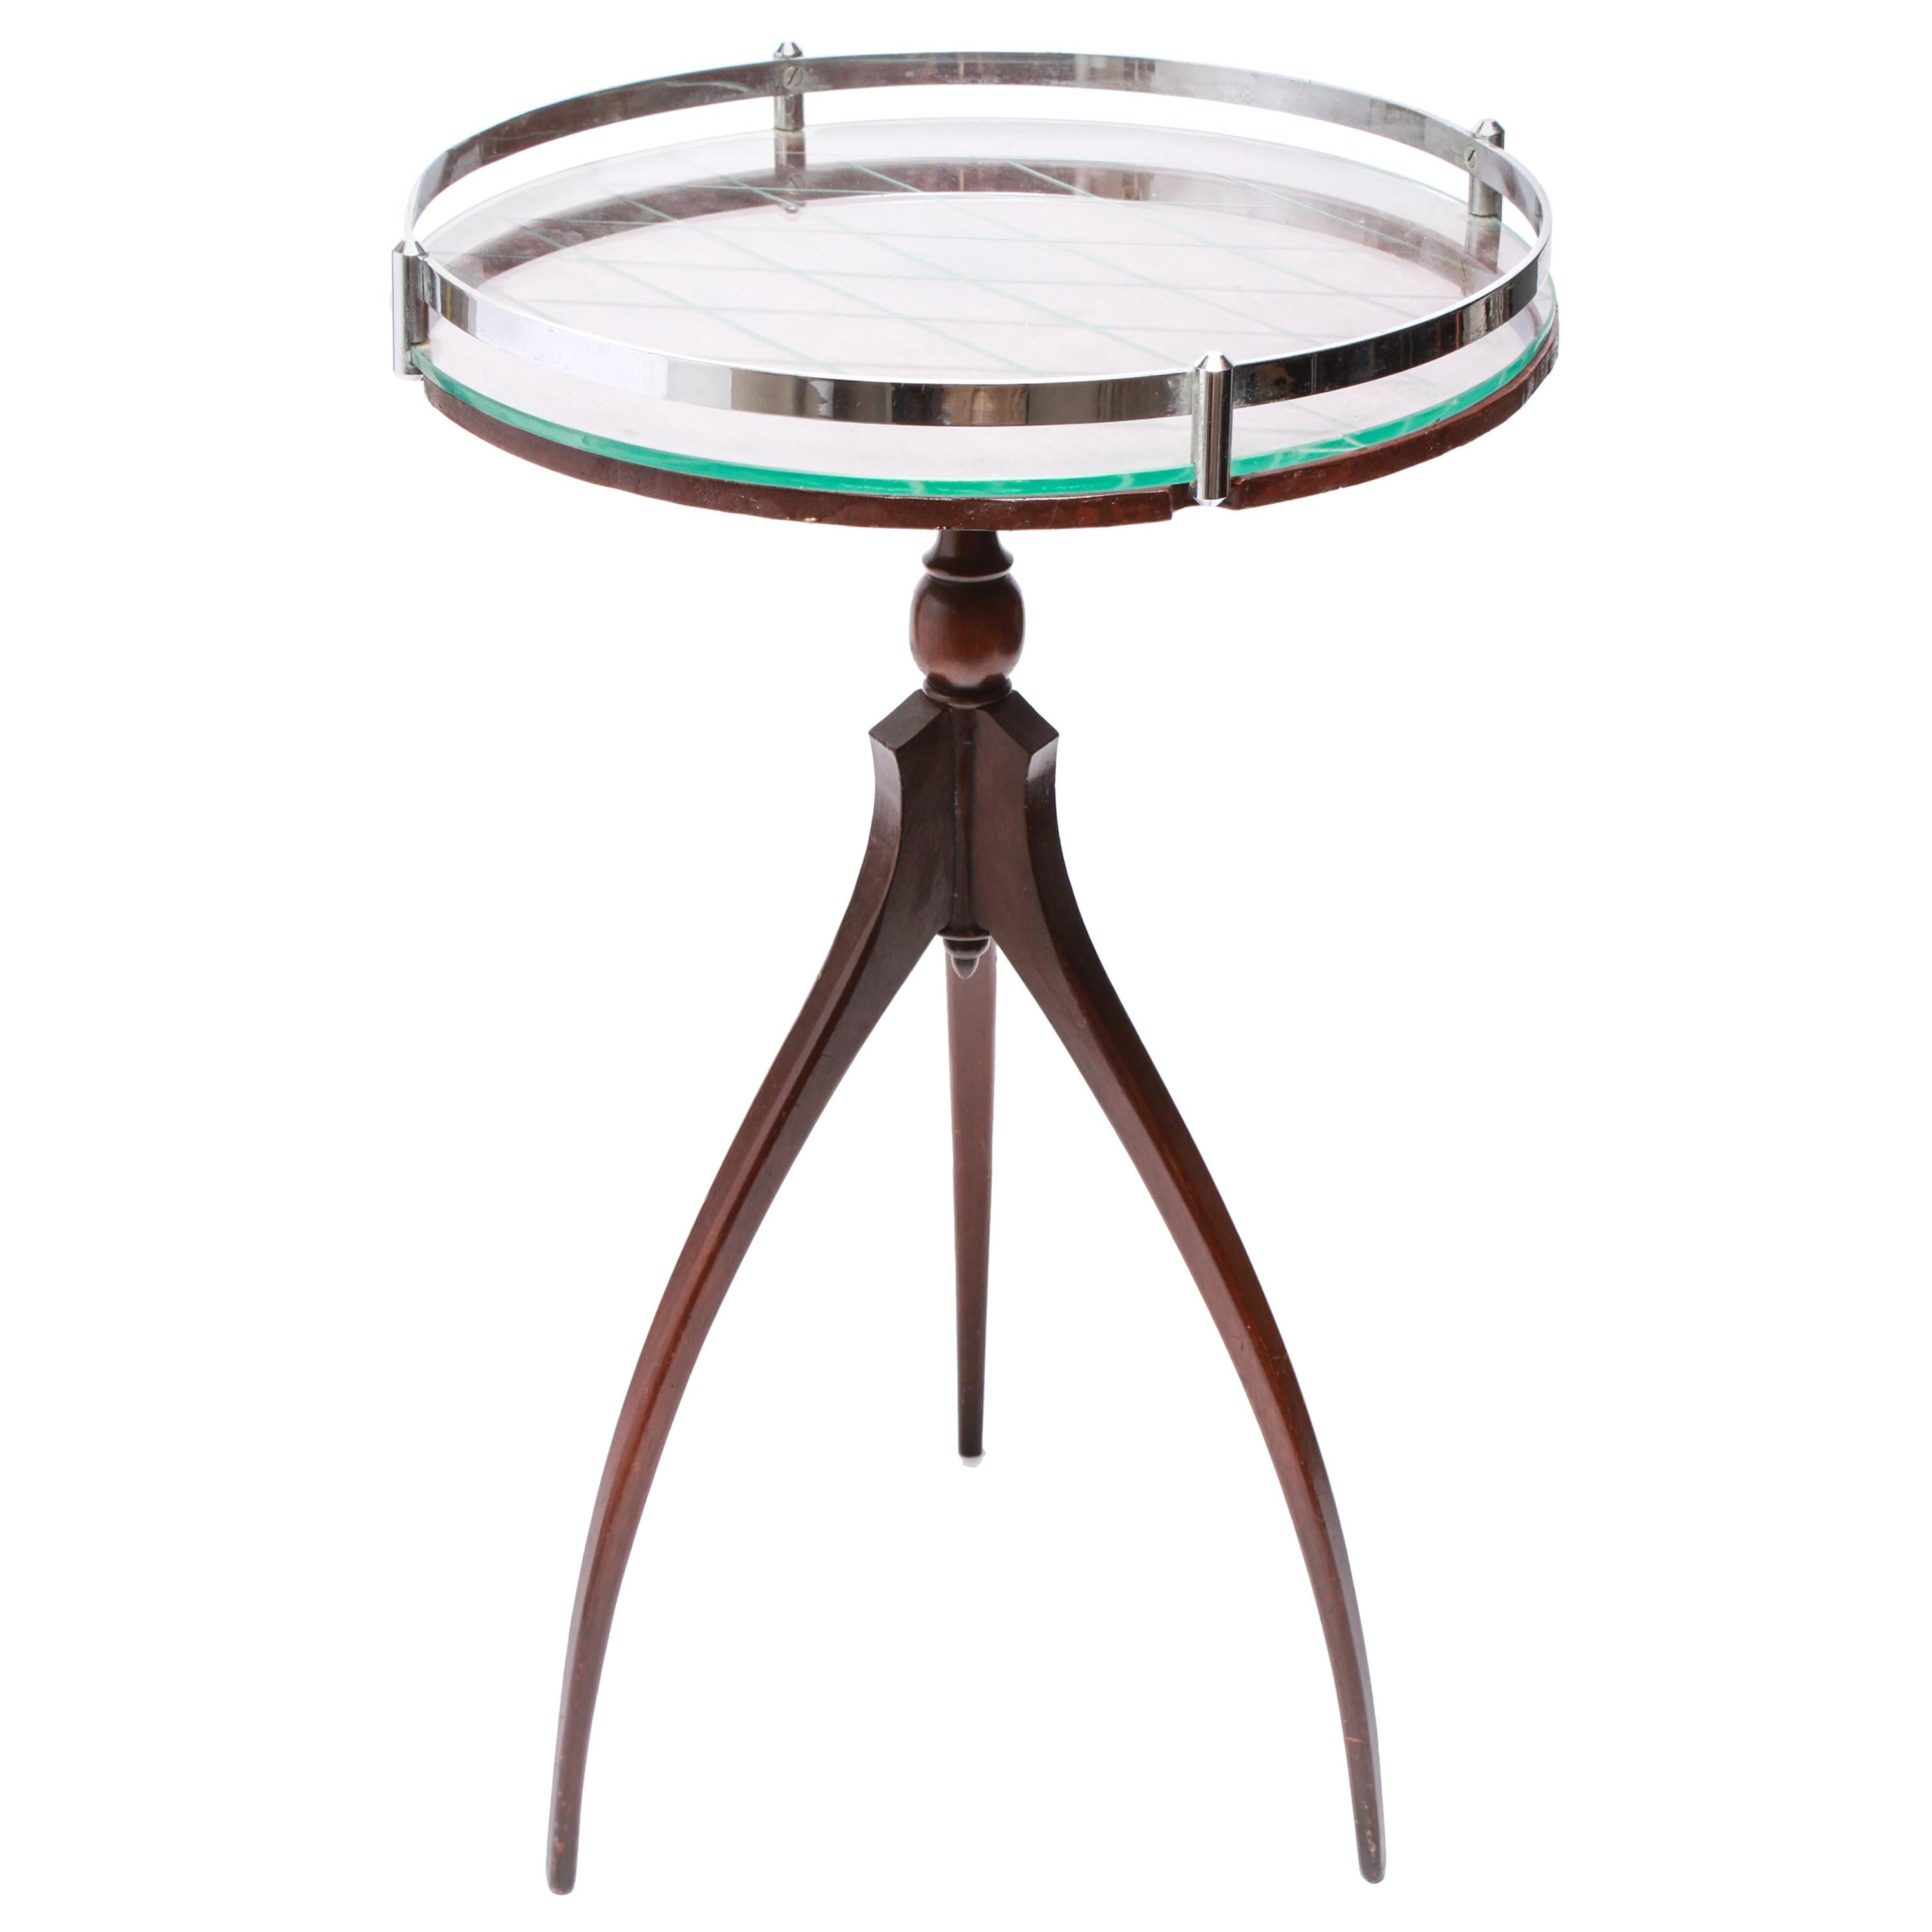 Art Deco Style Tripod Side Table with Glass Tray Top